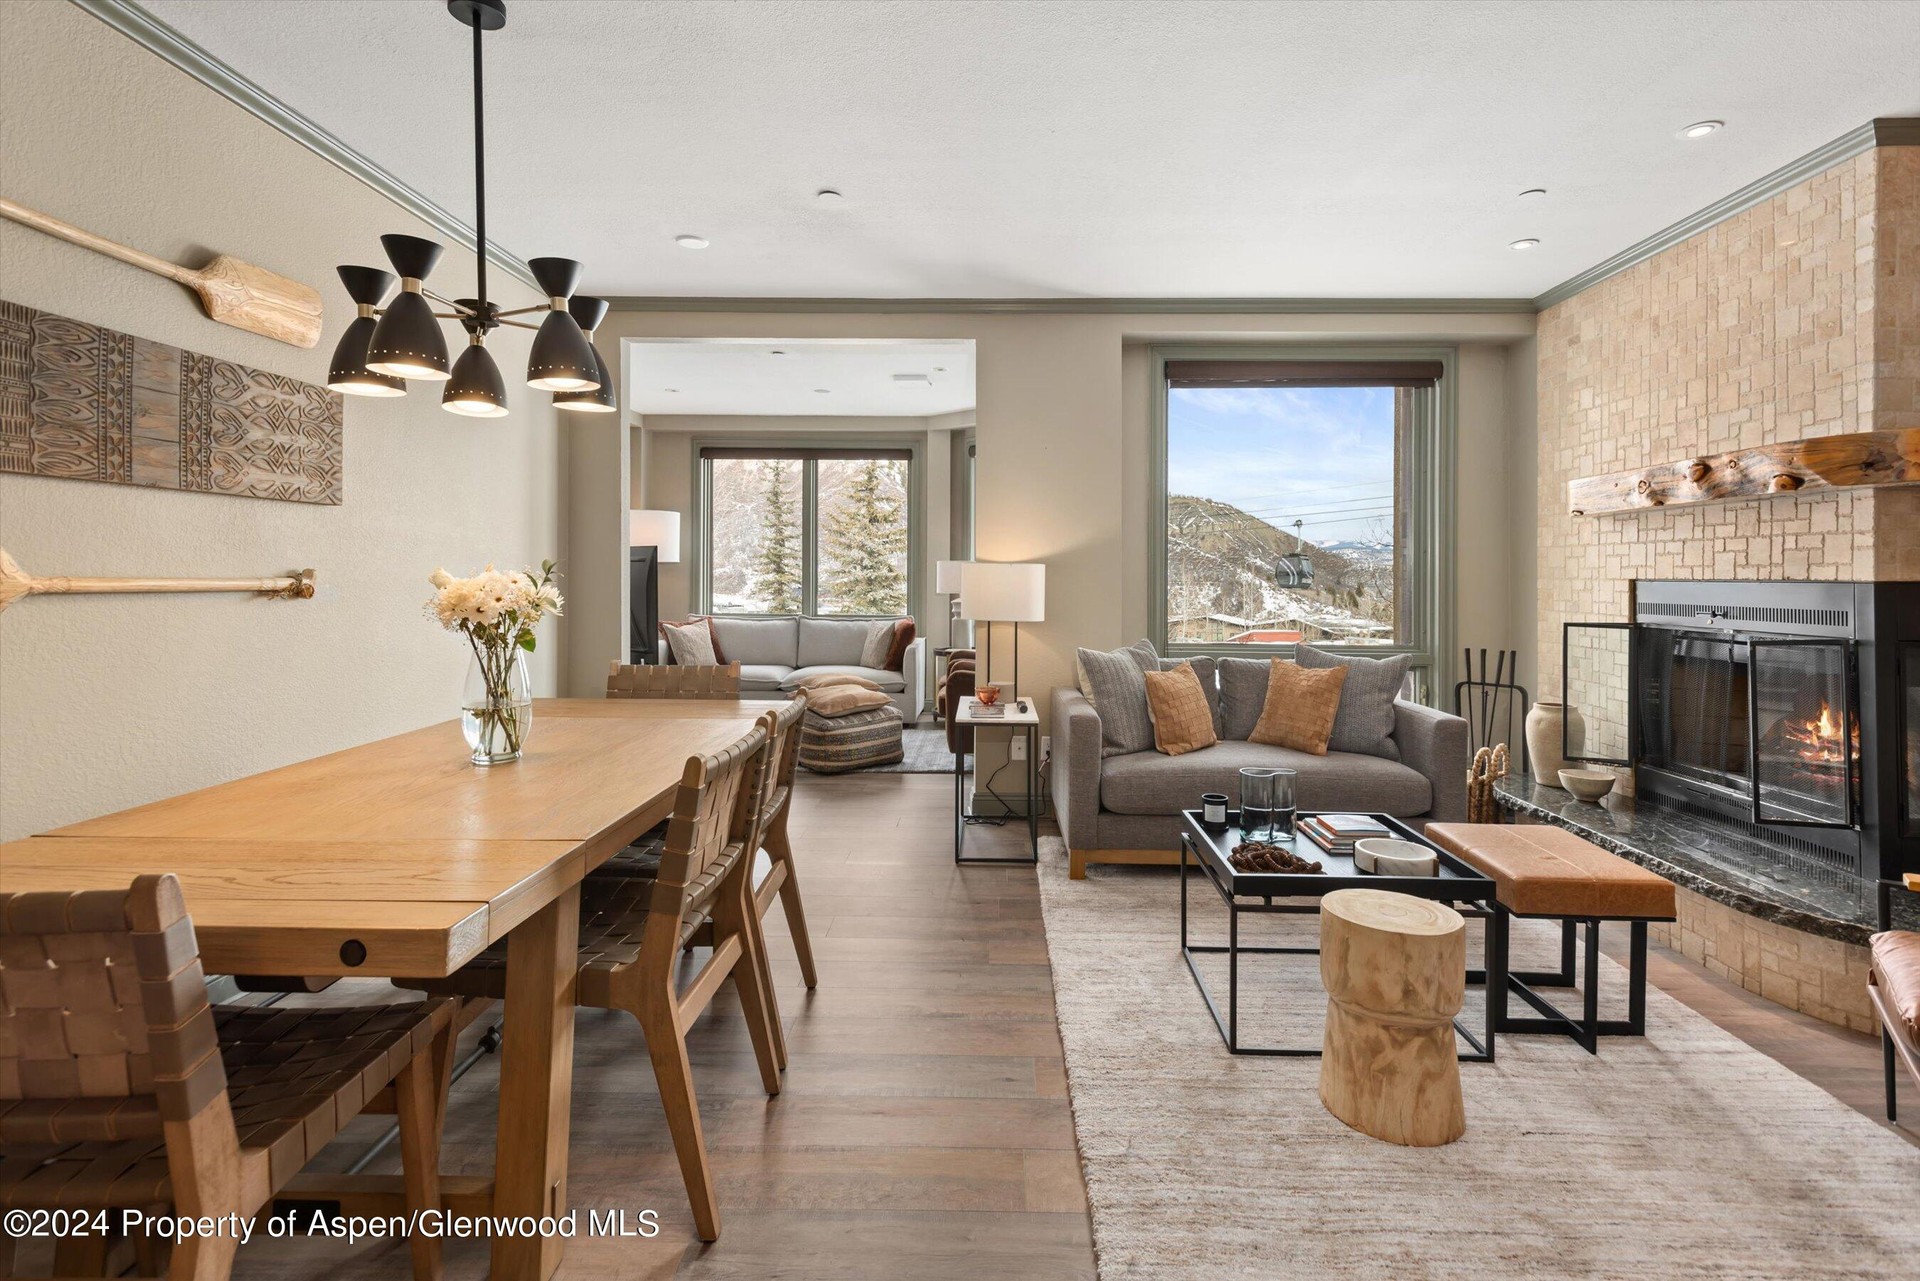 Luxury Living in the Heart of Snowmass Village